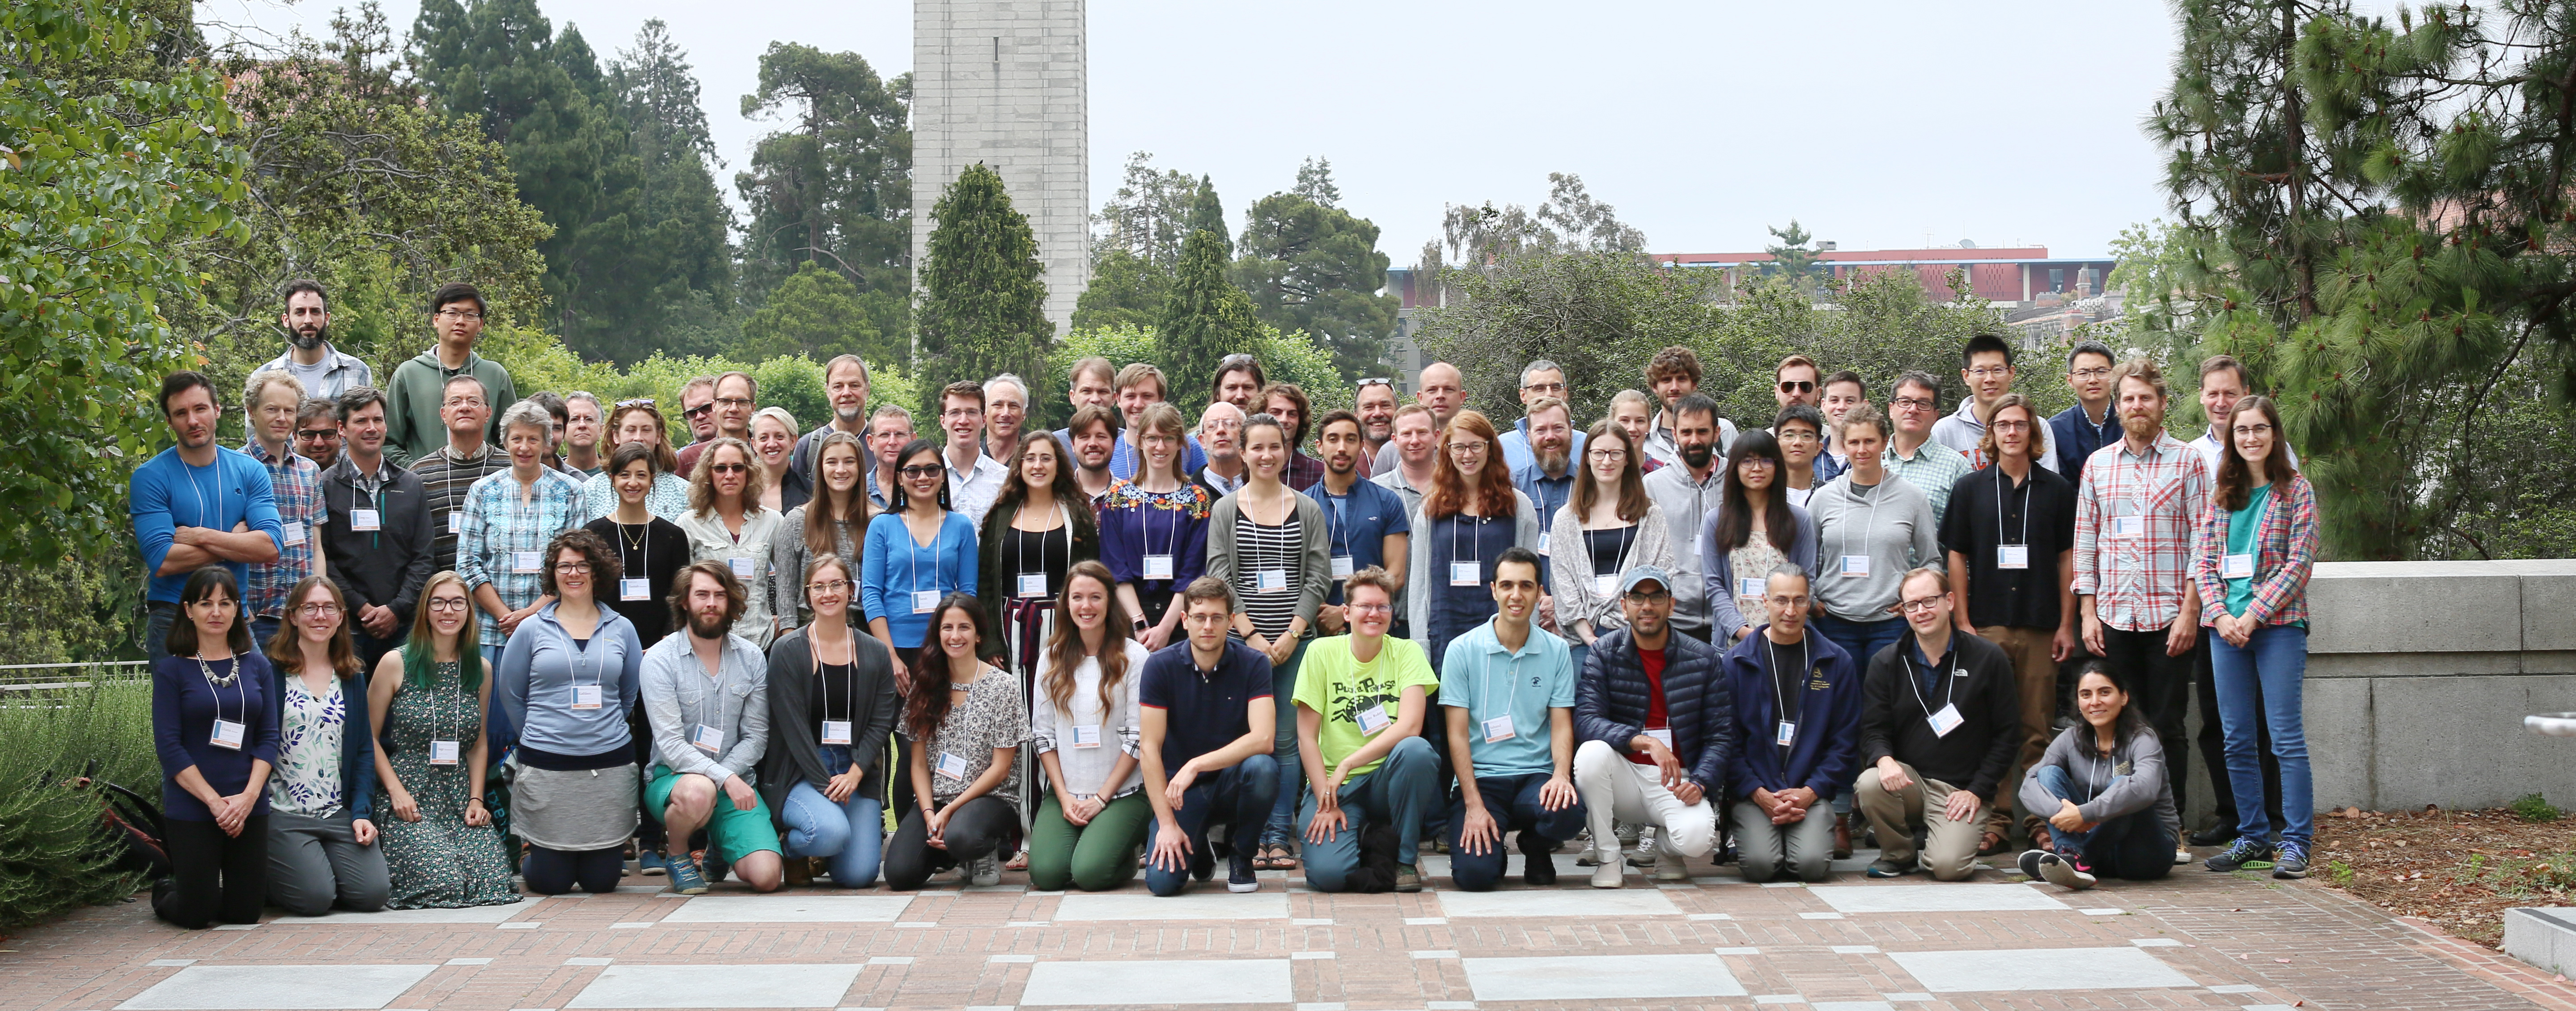 group photo of CIDER 2019 summer program participants at UC Berkeley campus with Campanile in background